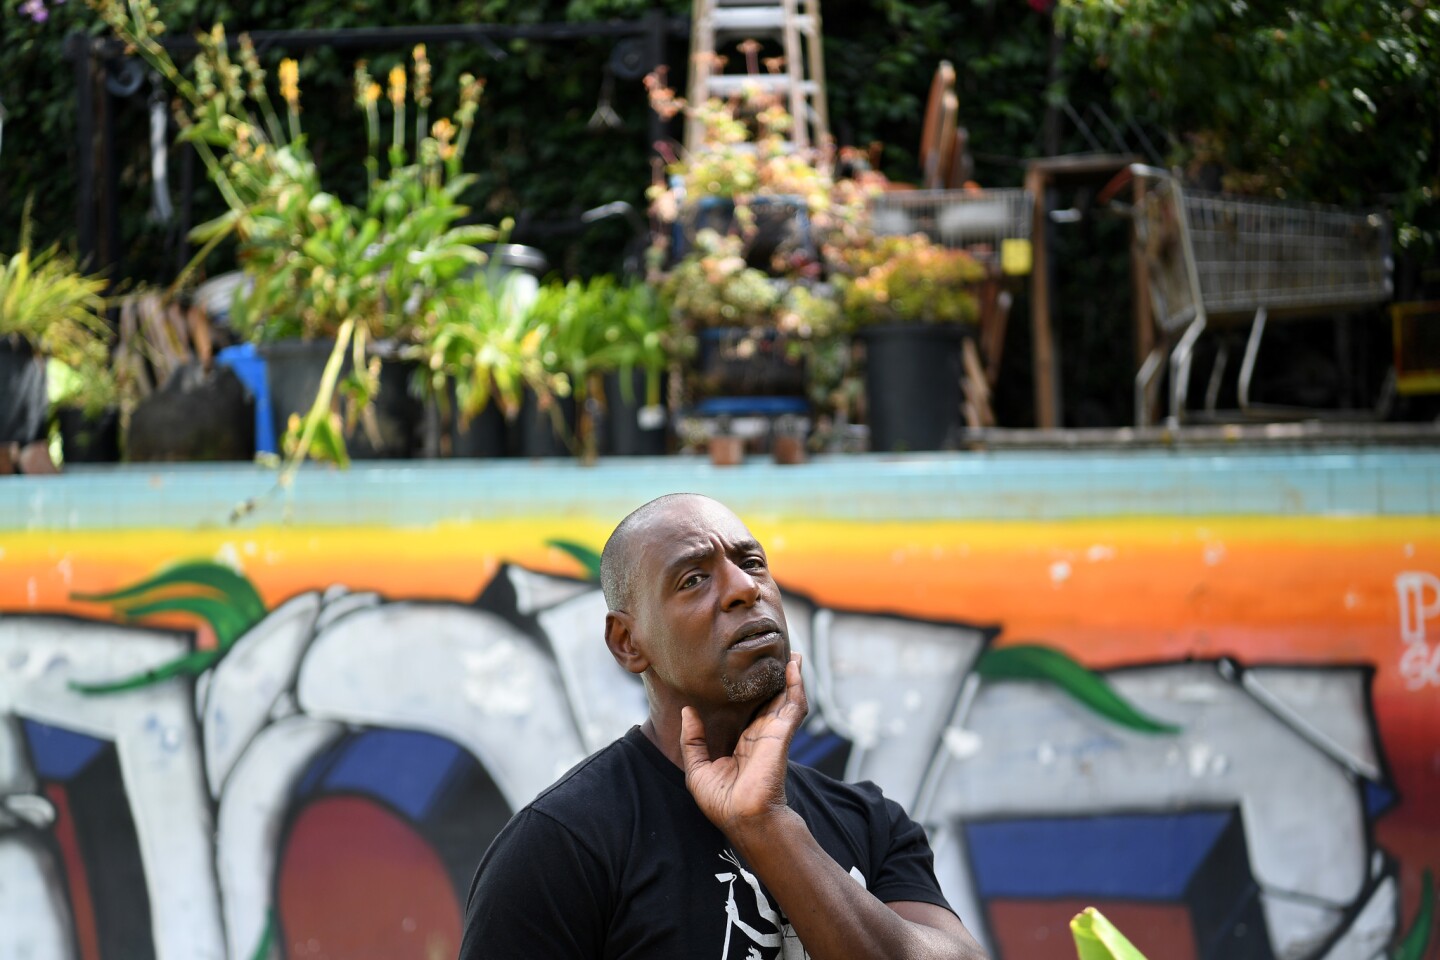 Ron Finley, a.k.a. the Gangsta Gardener, surveys the edible garden he created out of an Olympic-sized pool in his South Los Angeles home.